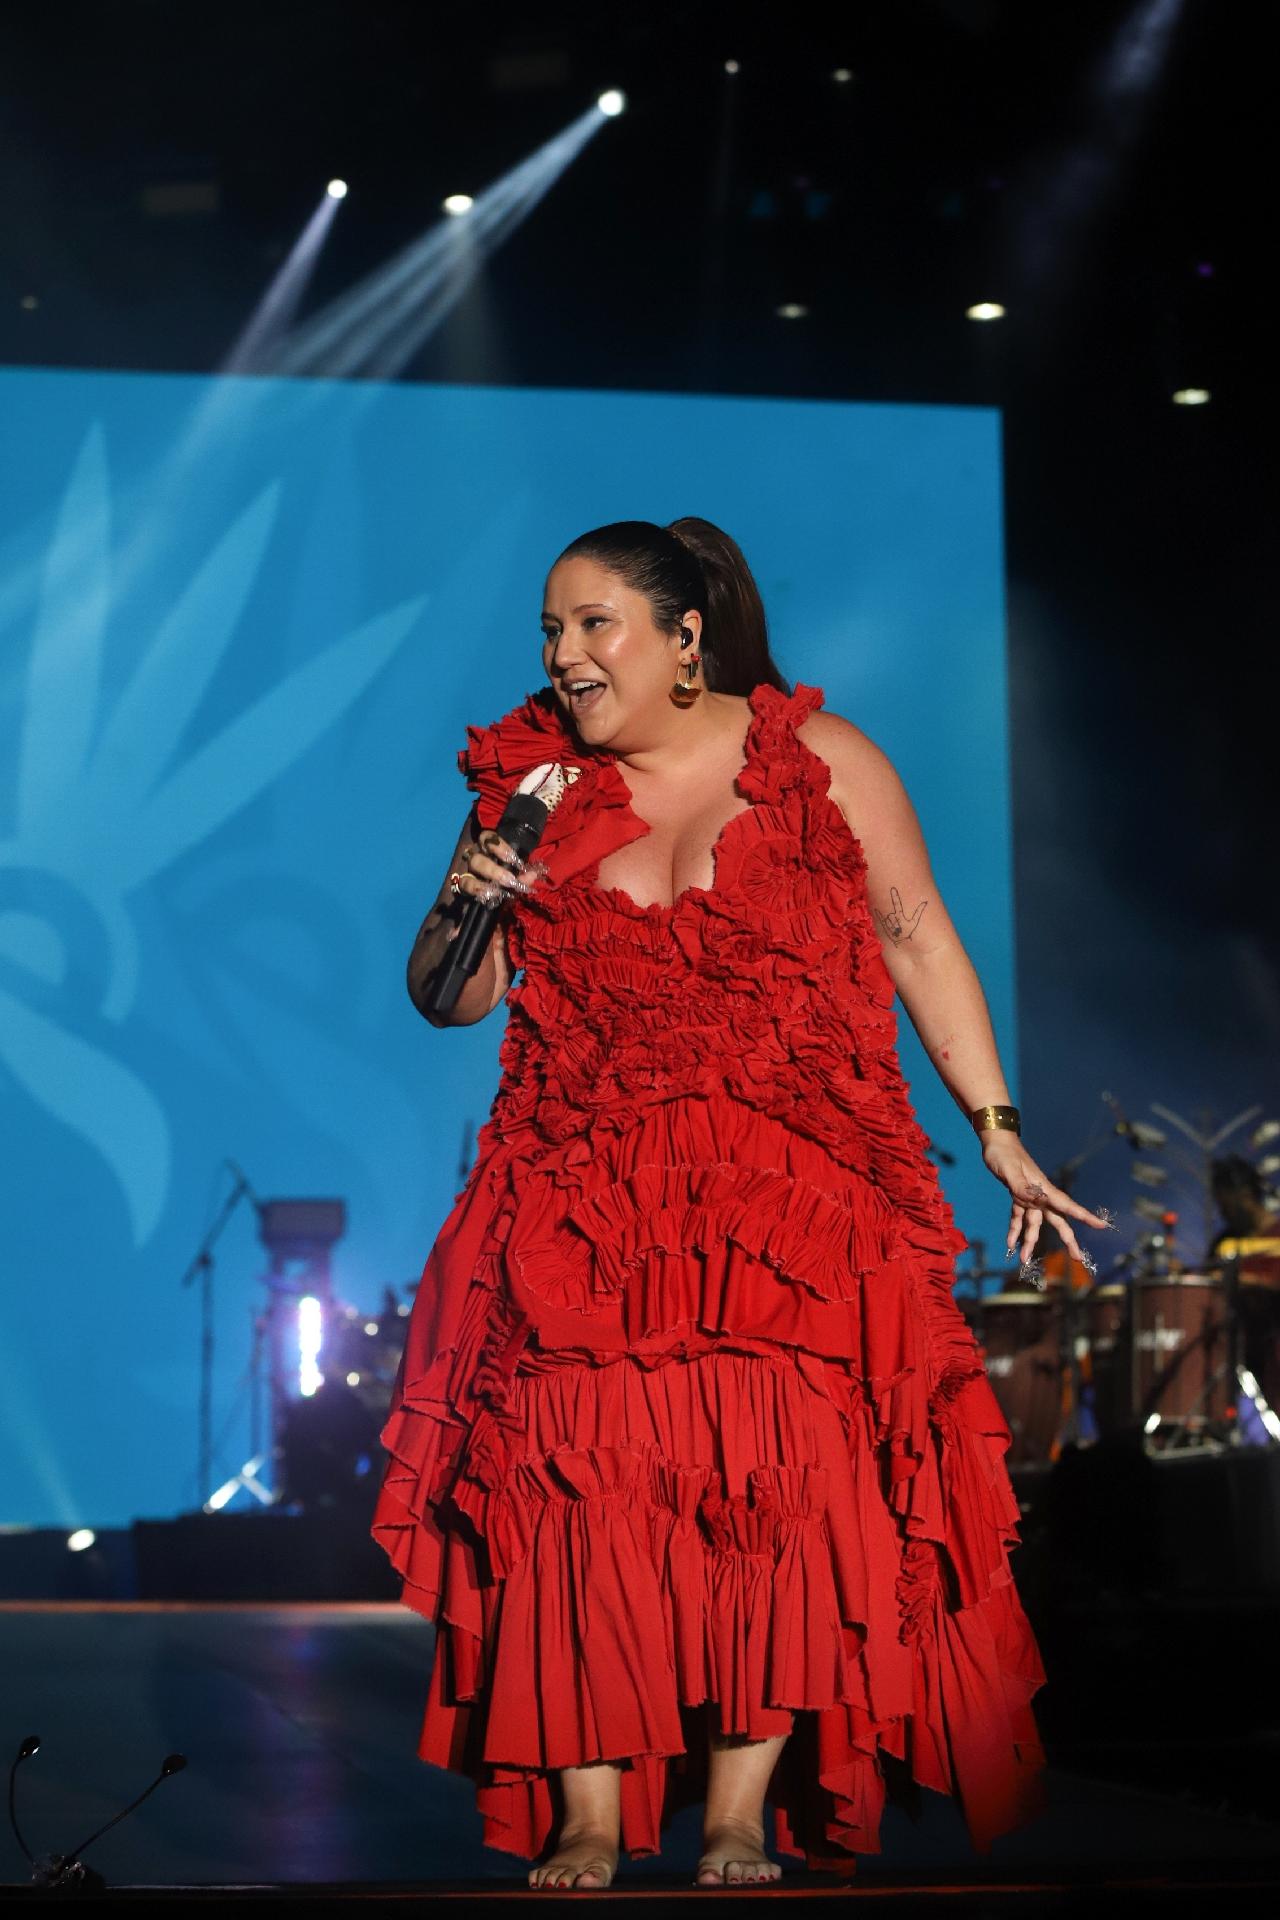 Maria Rita performs on the sunset stage and draws attention in her red dress on the sixth day of rock music in Rio - Zô Guimarães / UOL